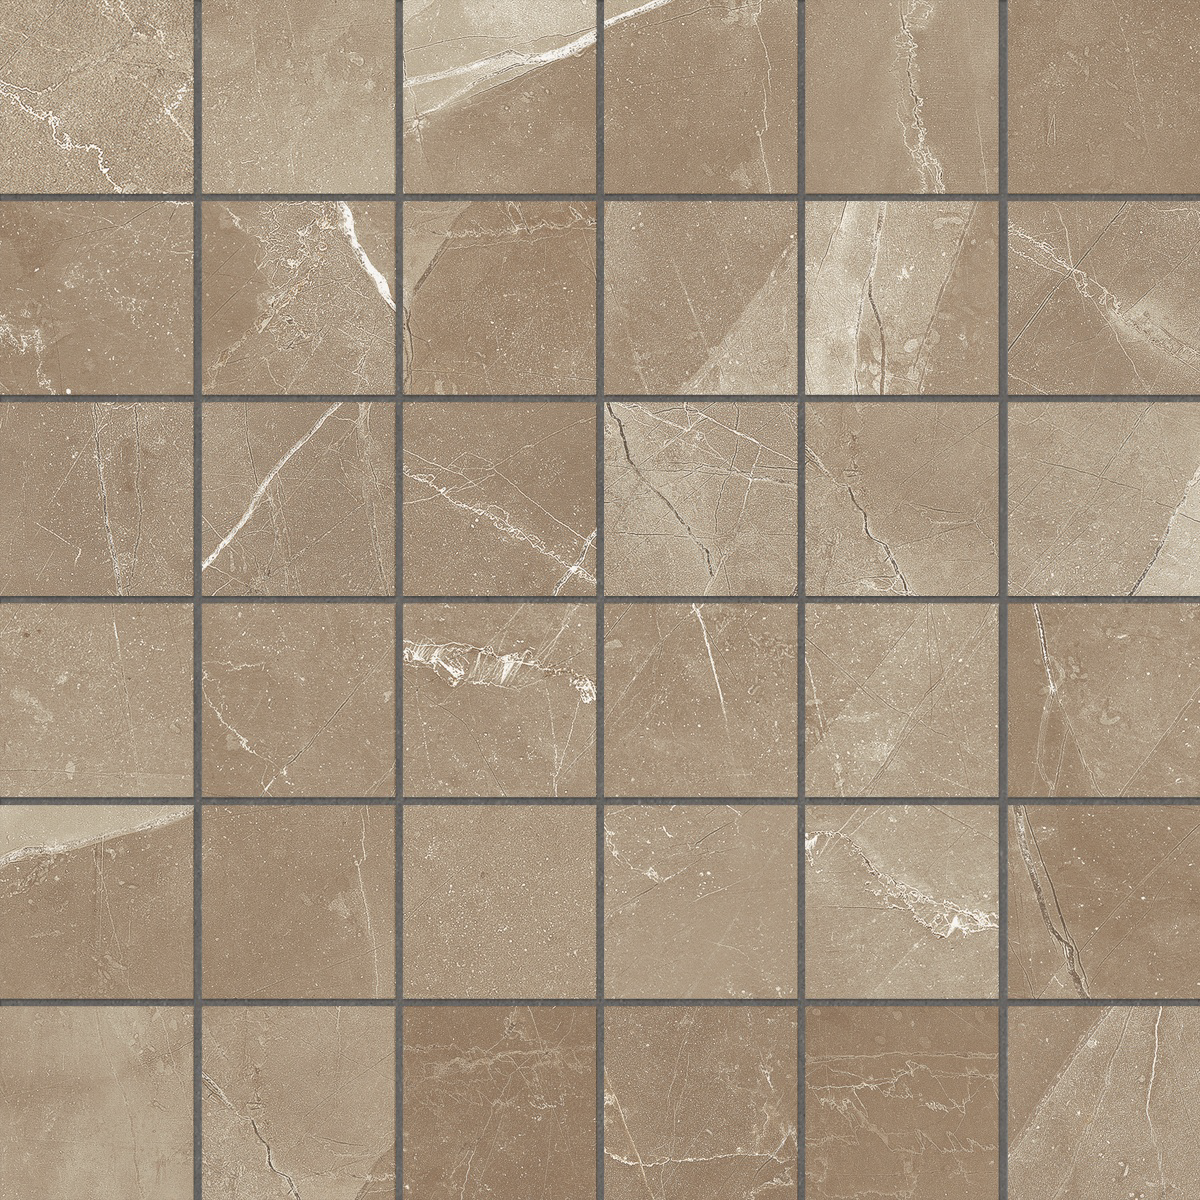 pulpis moca straight stack 2x2-inch pattern glazed porcelain mosaic from classic anatolia collection distributed by surface group international matte finish straight edge edge mesh shape